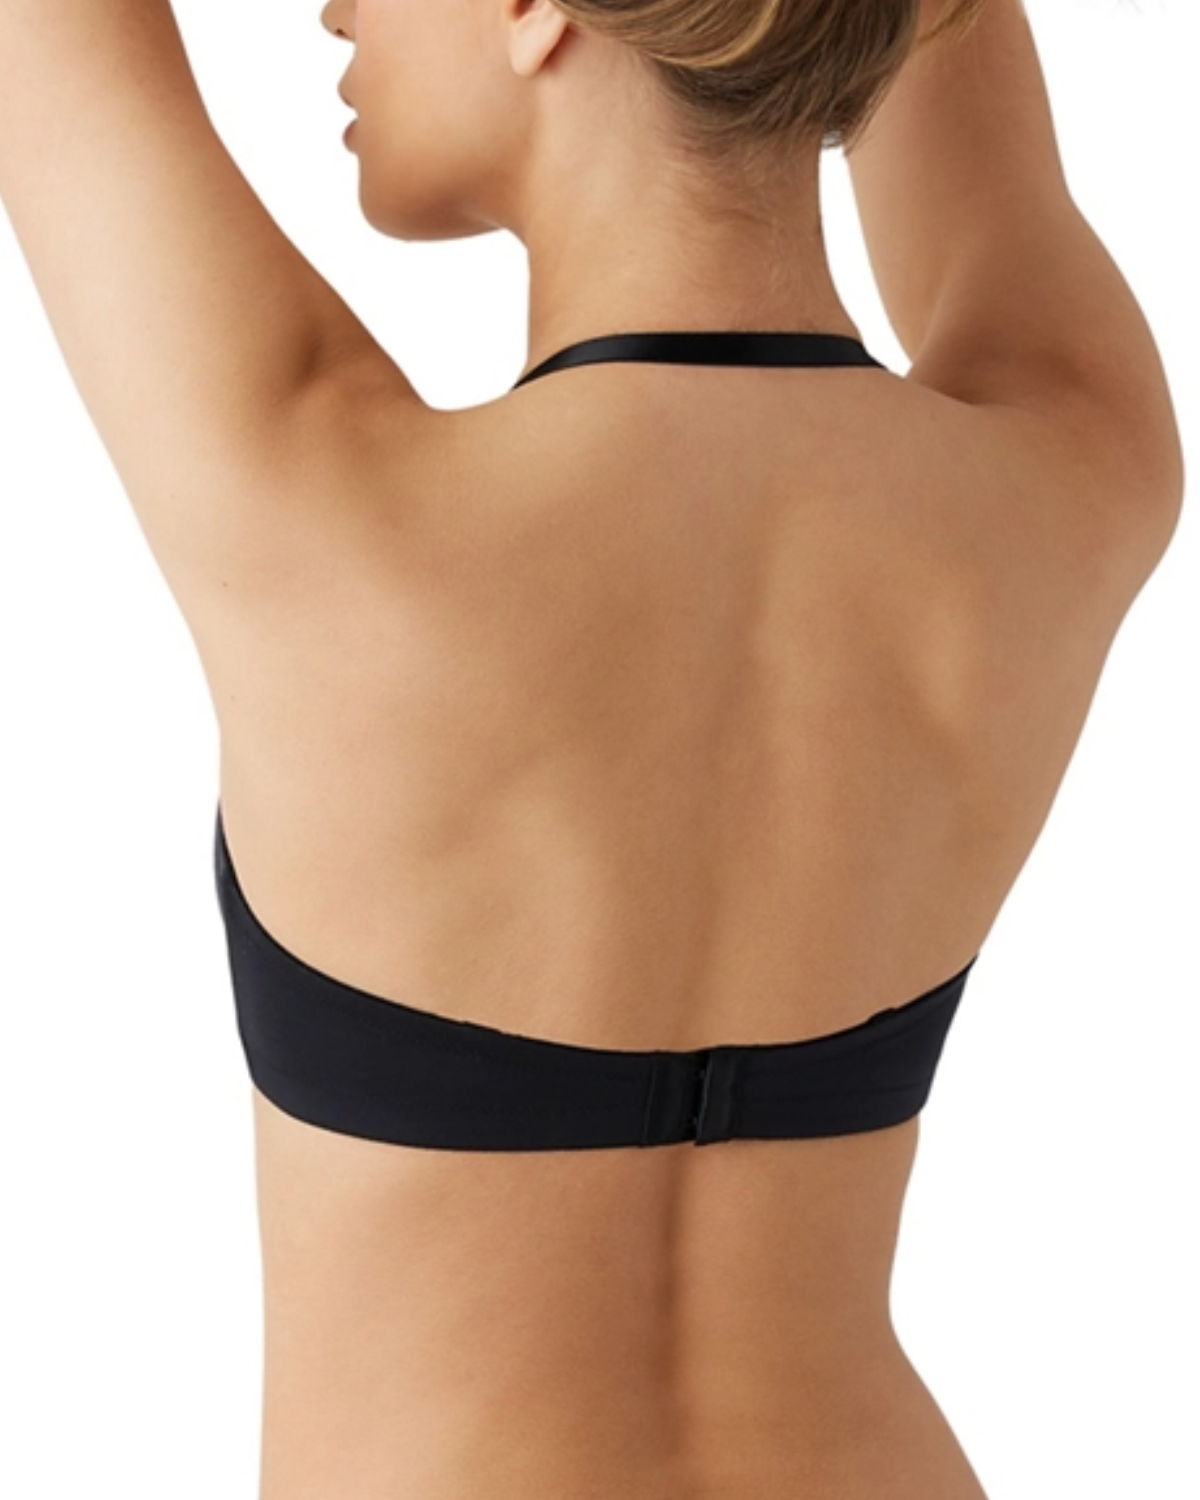 Model wearing a molded wire-free strapless bra in black with detachable straps to wear multiple ways in black